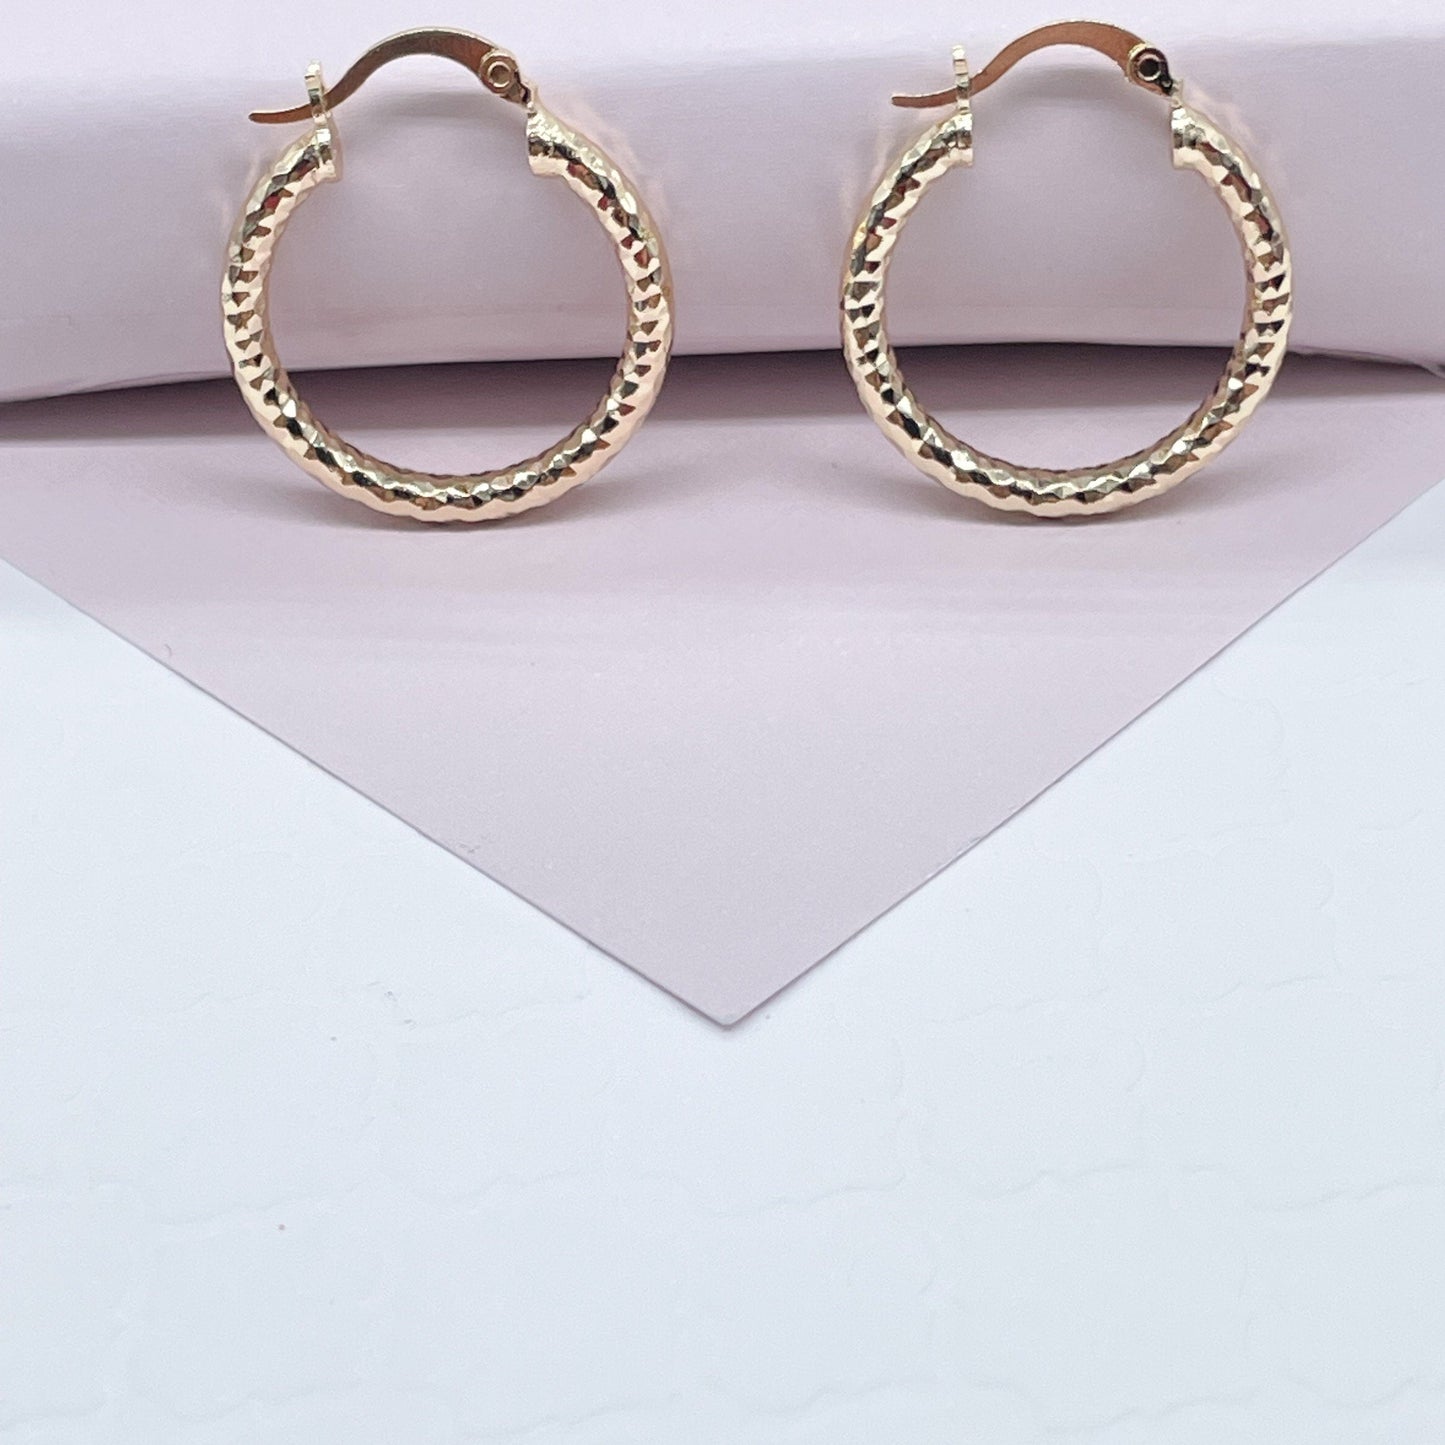 18k Gold Layered Small Rugged Textured Hoop Earring Medium Size 25mm For the